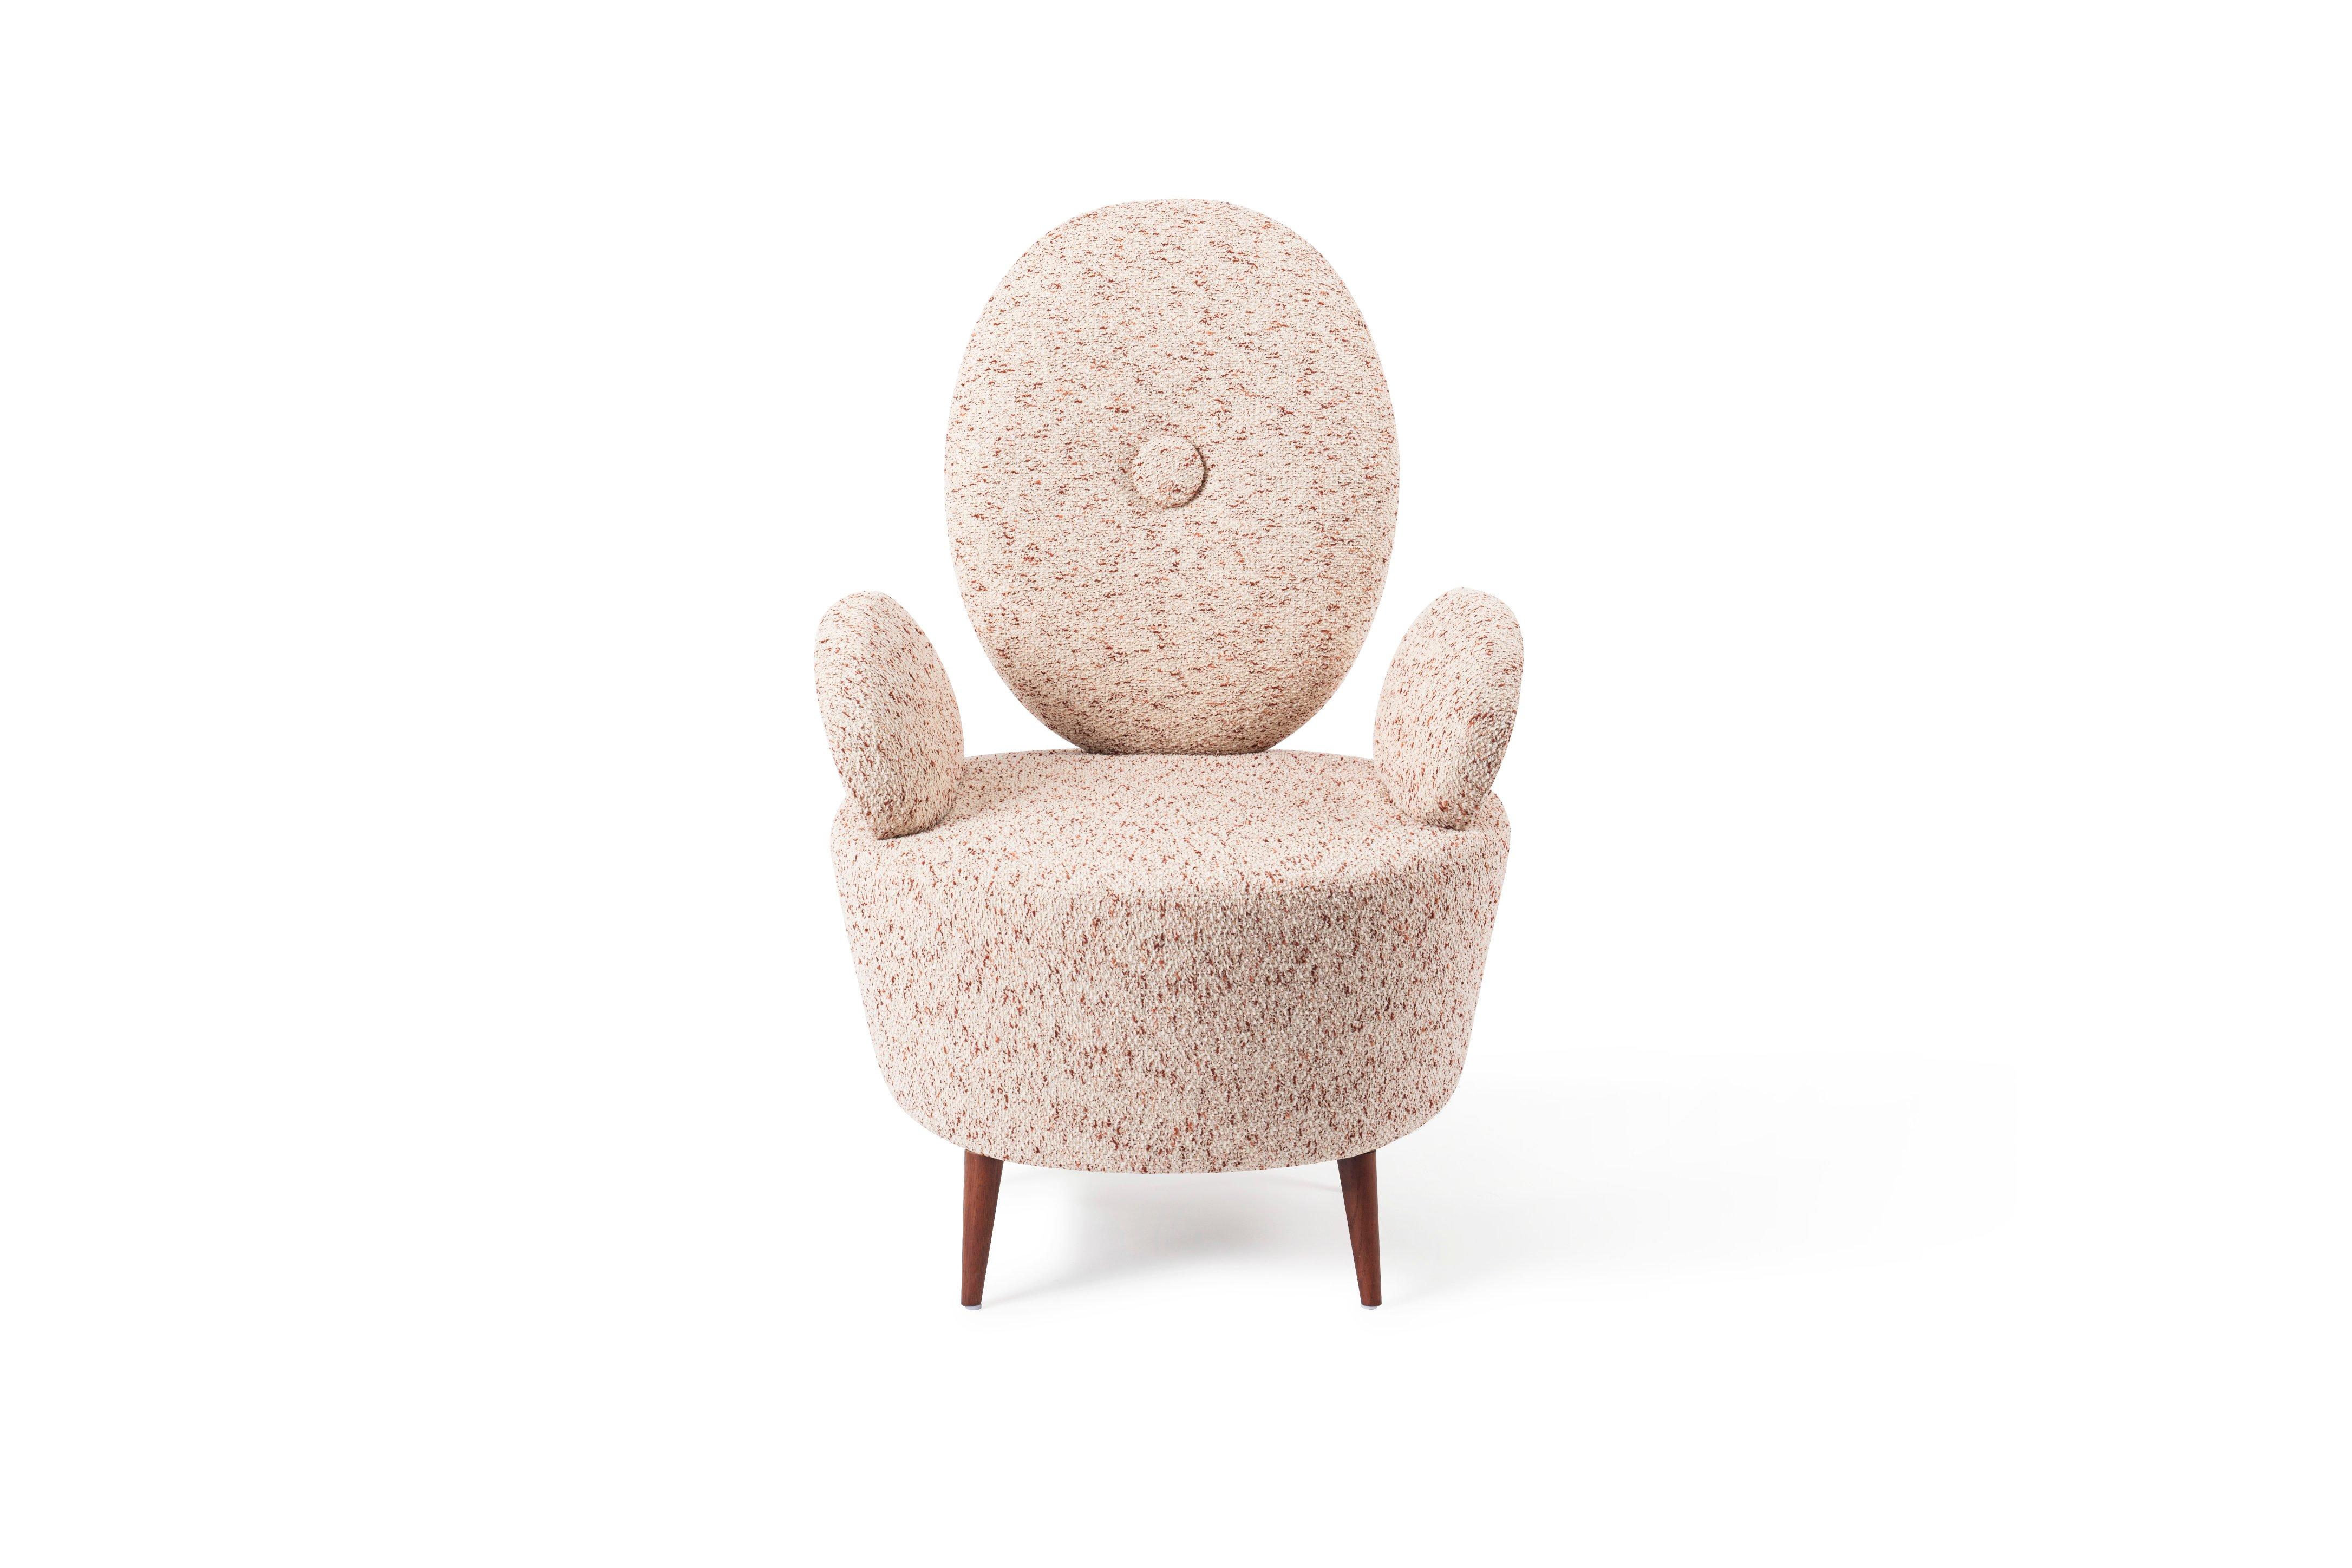 Ayi armchair and ottoman designed by Thomas Dariel, Maison Dada
Armchair • W76.9 x D79.6 x H105 / SH45 cm
Ottoman • W53 x D48 x H45 cm
Structure in solid timber and plywood • Memory foam
Base and seating fully upholstered in fabric
Metal base with